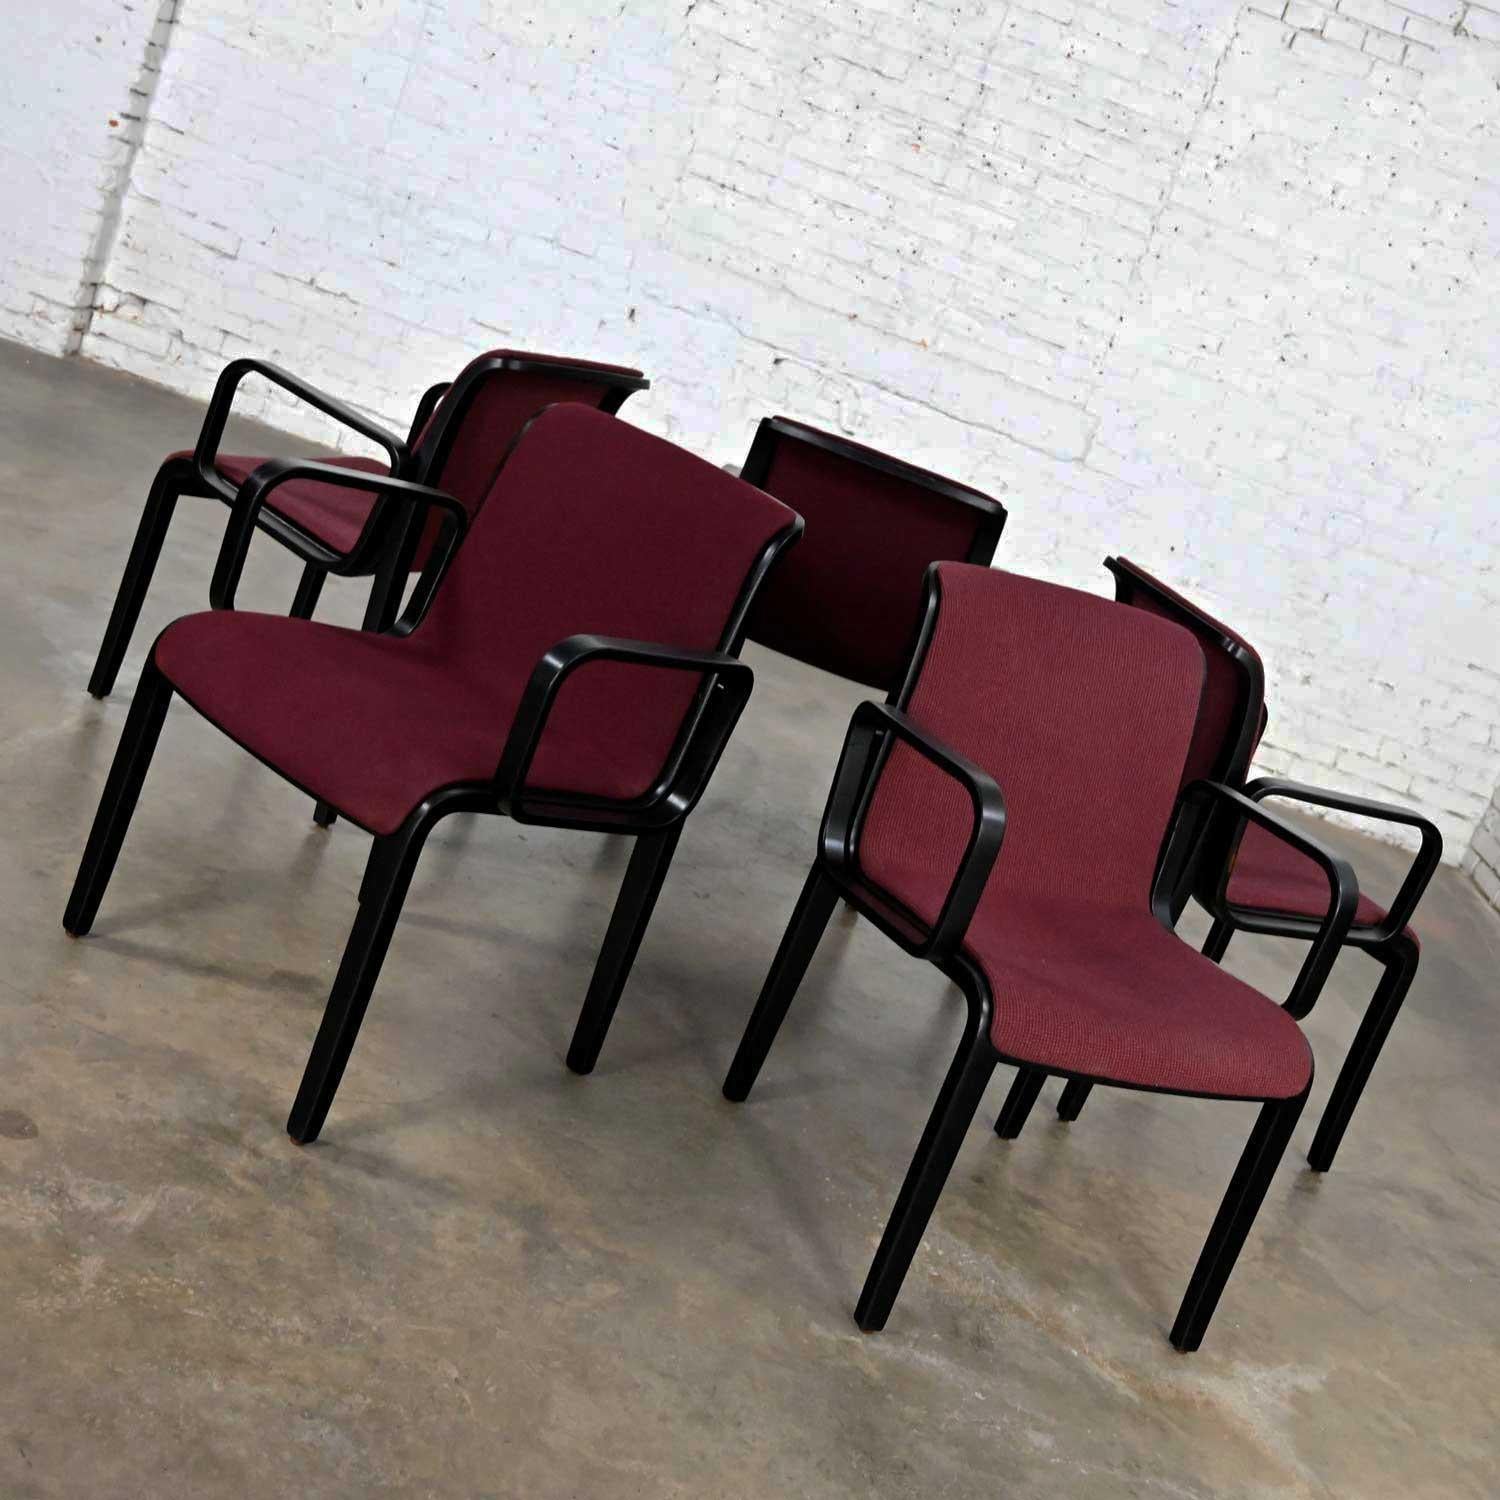 5 Knoll MCM Bentwood 1300 Series Dining Chairs Maroon & Black by Bill Stephens In Good Condition For Sale In Topeka, KS